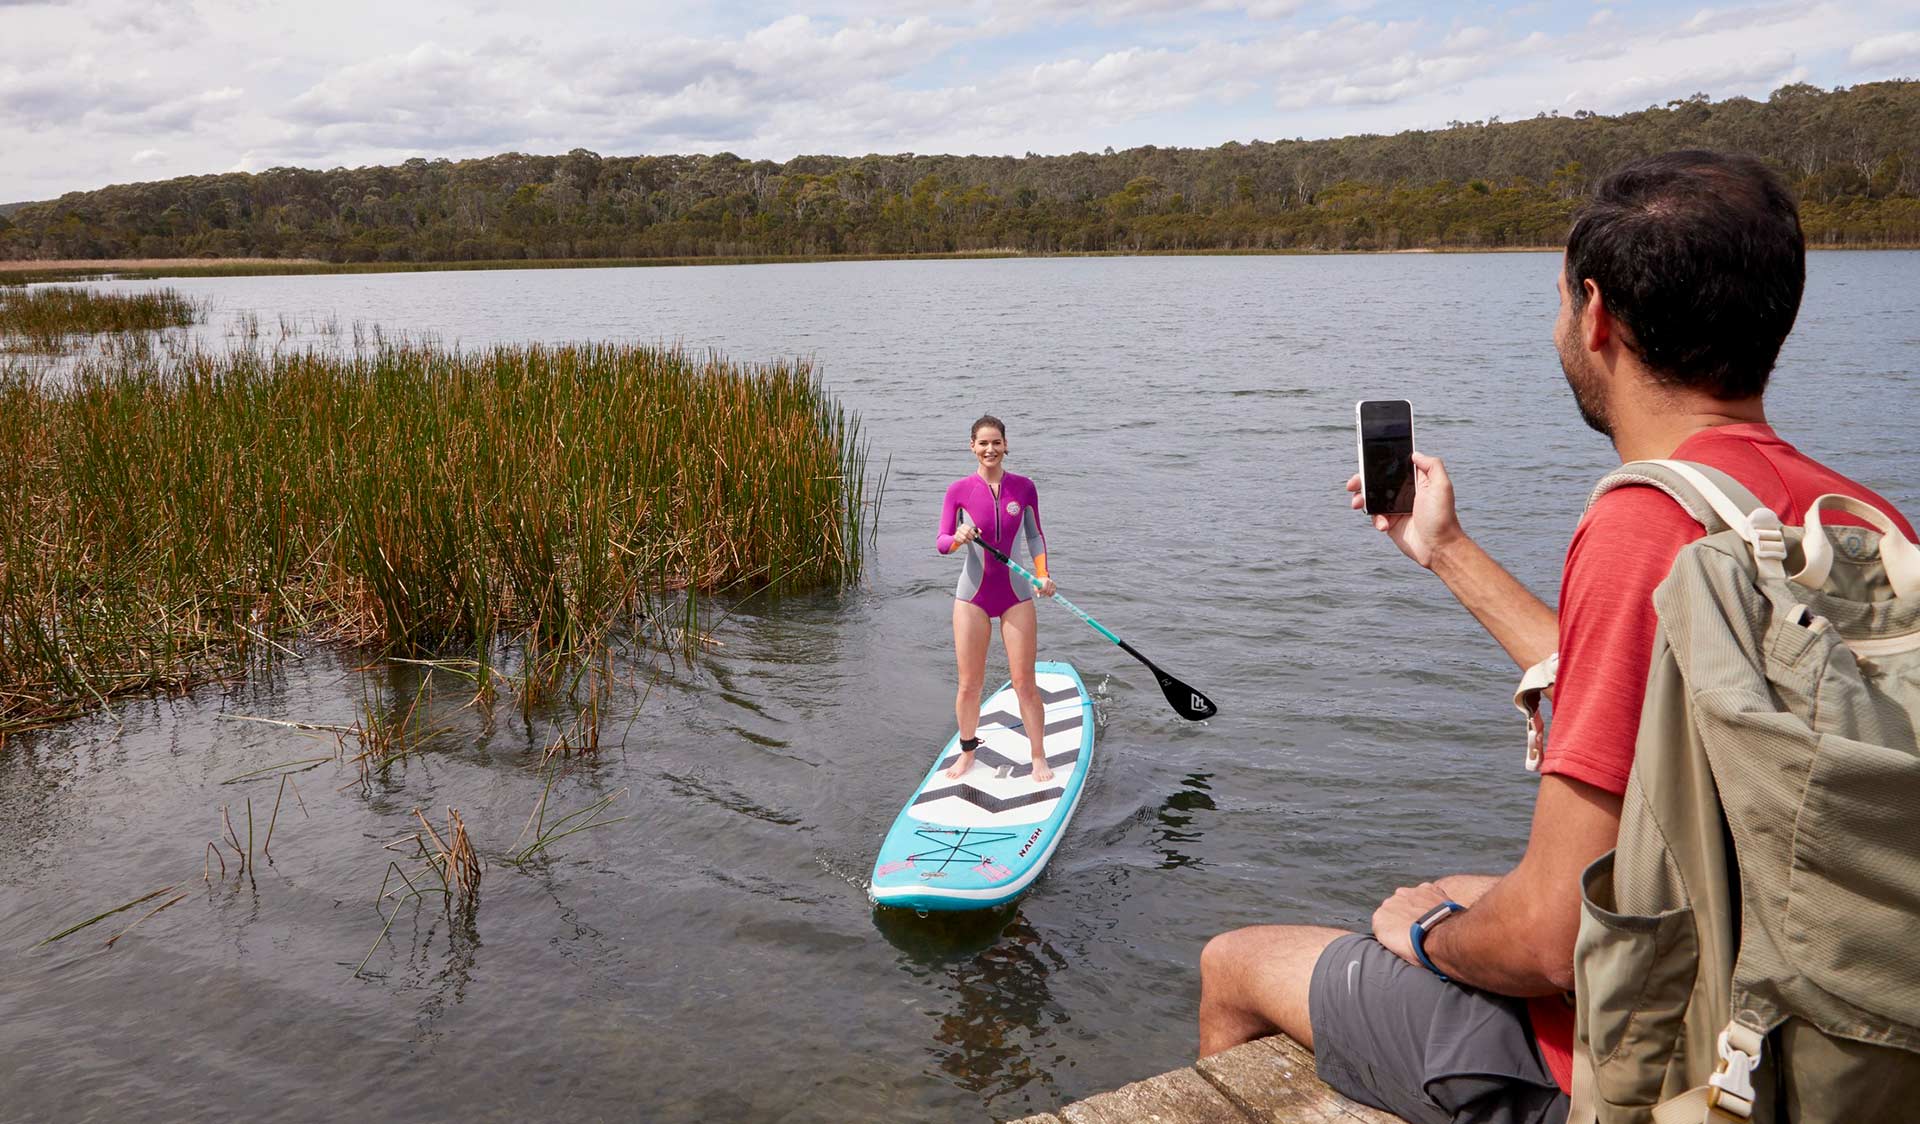 A man takes a photo from the bank of his partner on a stand-up paddle board on Lysterfield Lake.